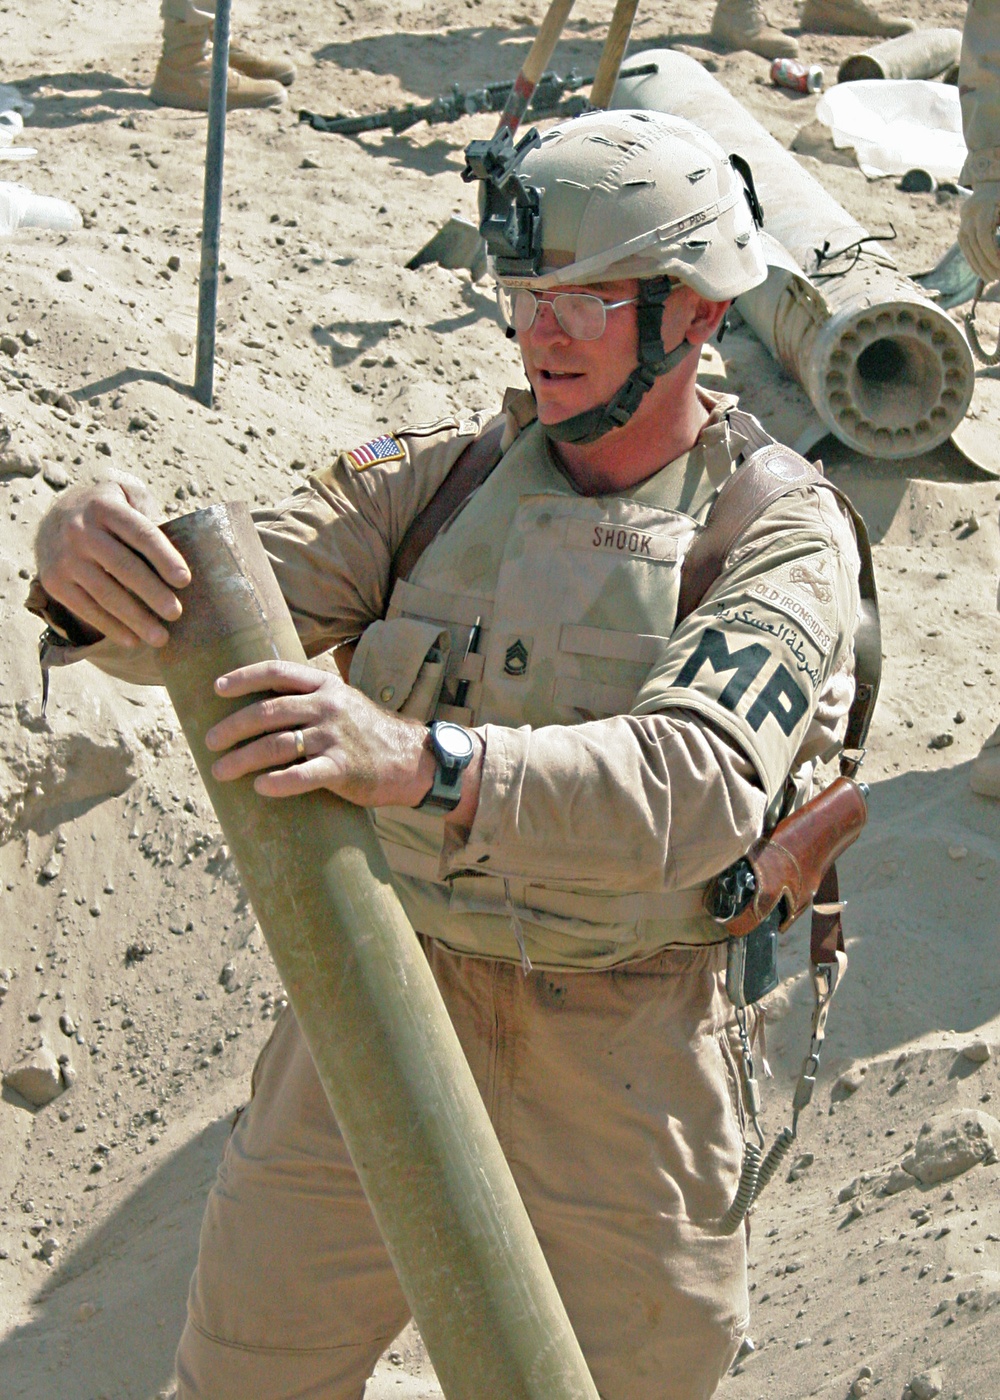 Sgt. 1st Class Shook removes a 122mm rocket tube from a weapons cache